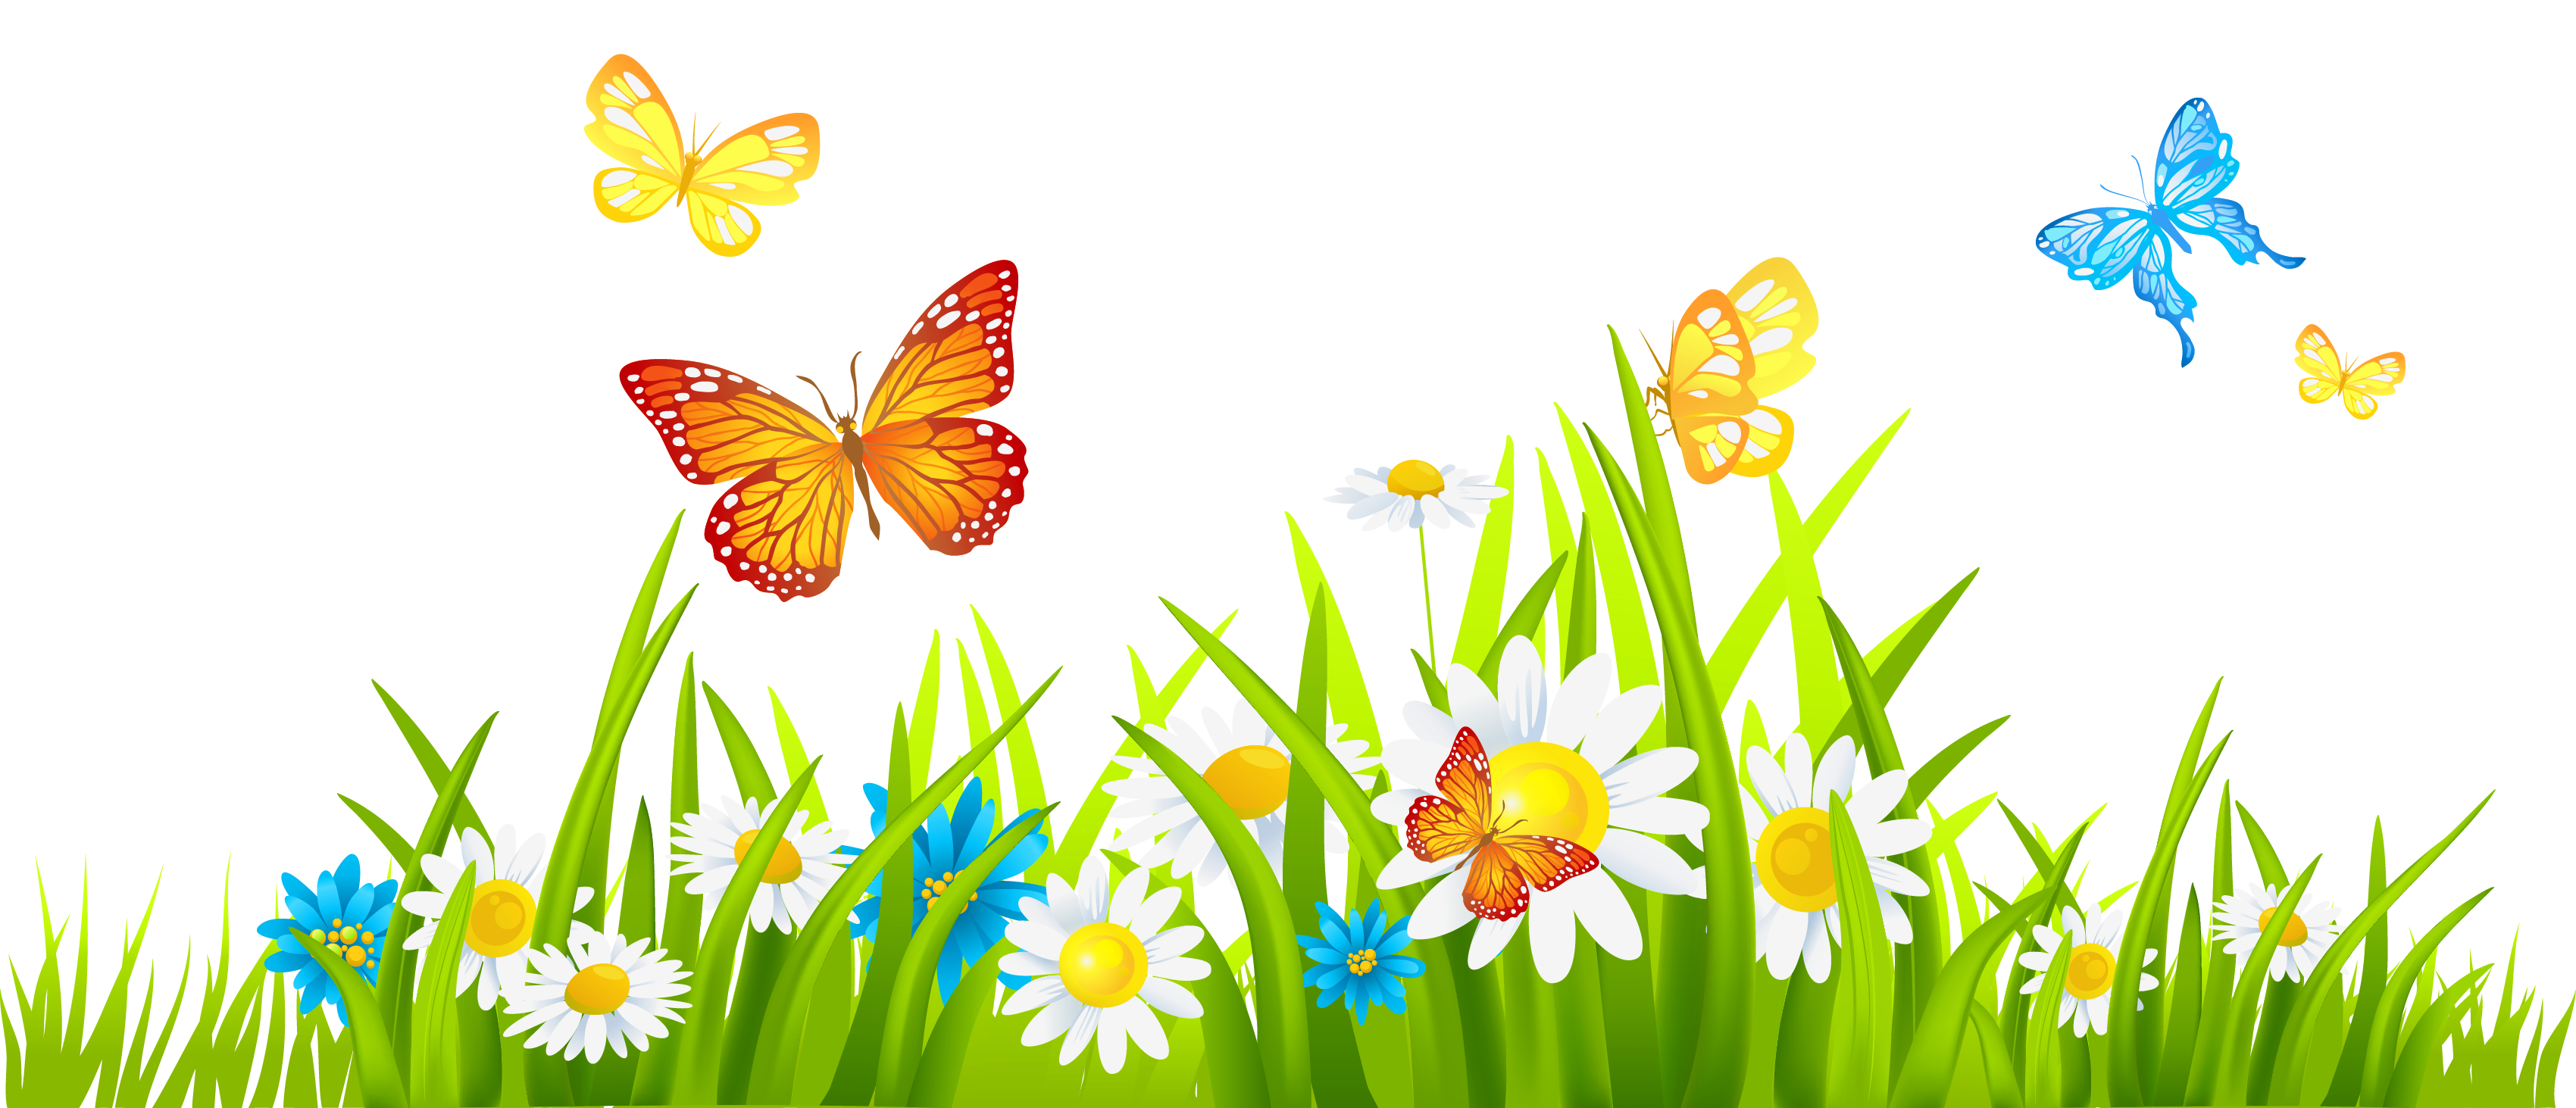 Grass And Flowers Images Png Image Clipart